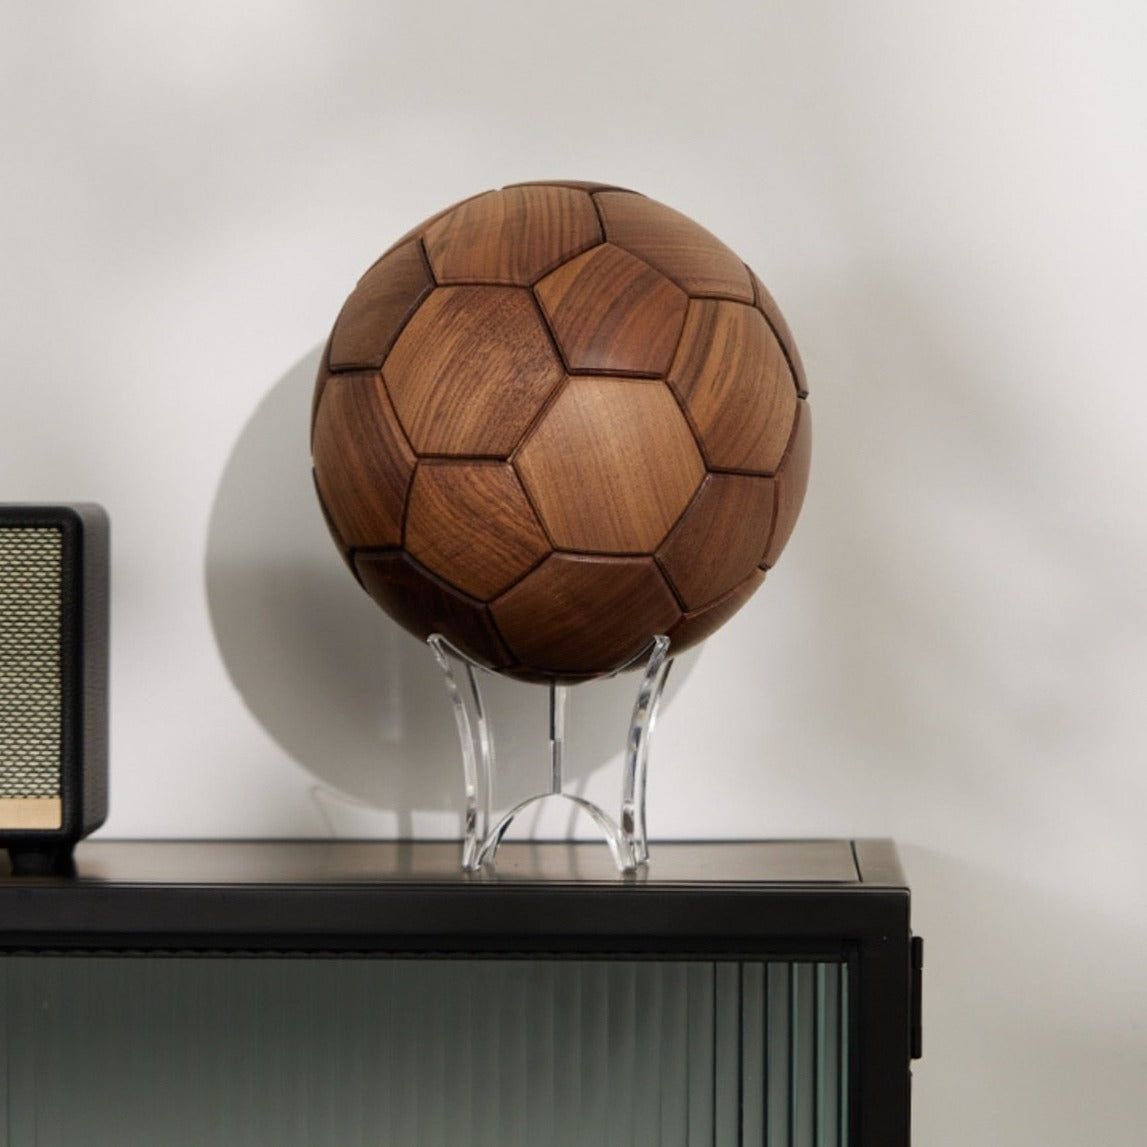 BONZINI. Polychrome wooden soccer table with balls and k…